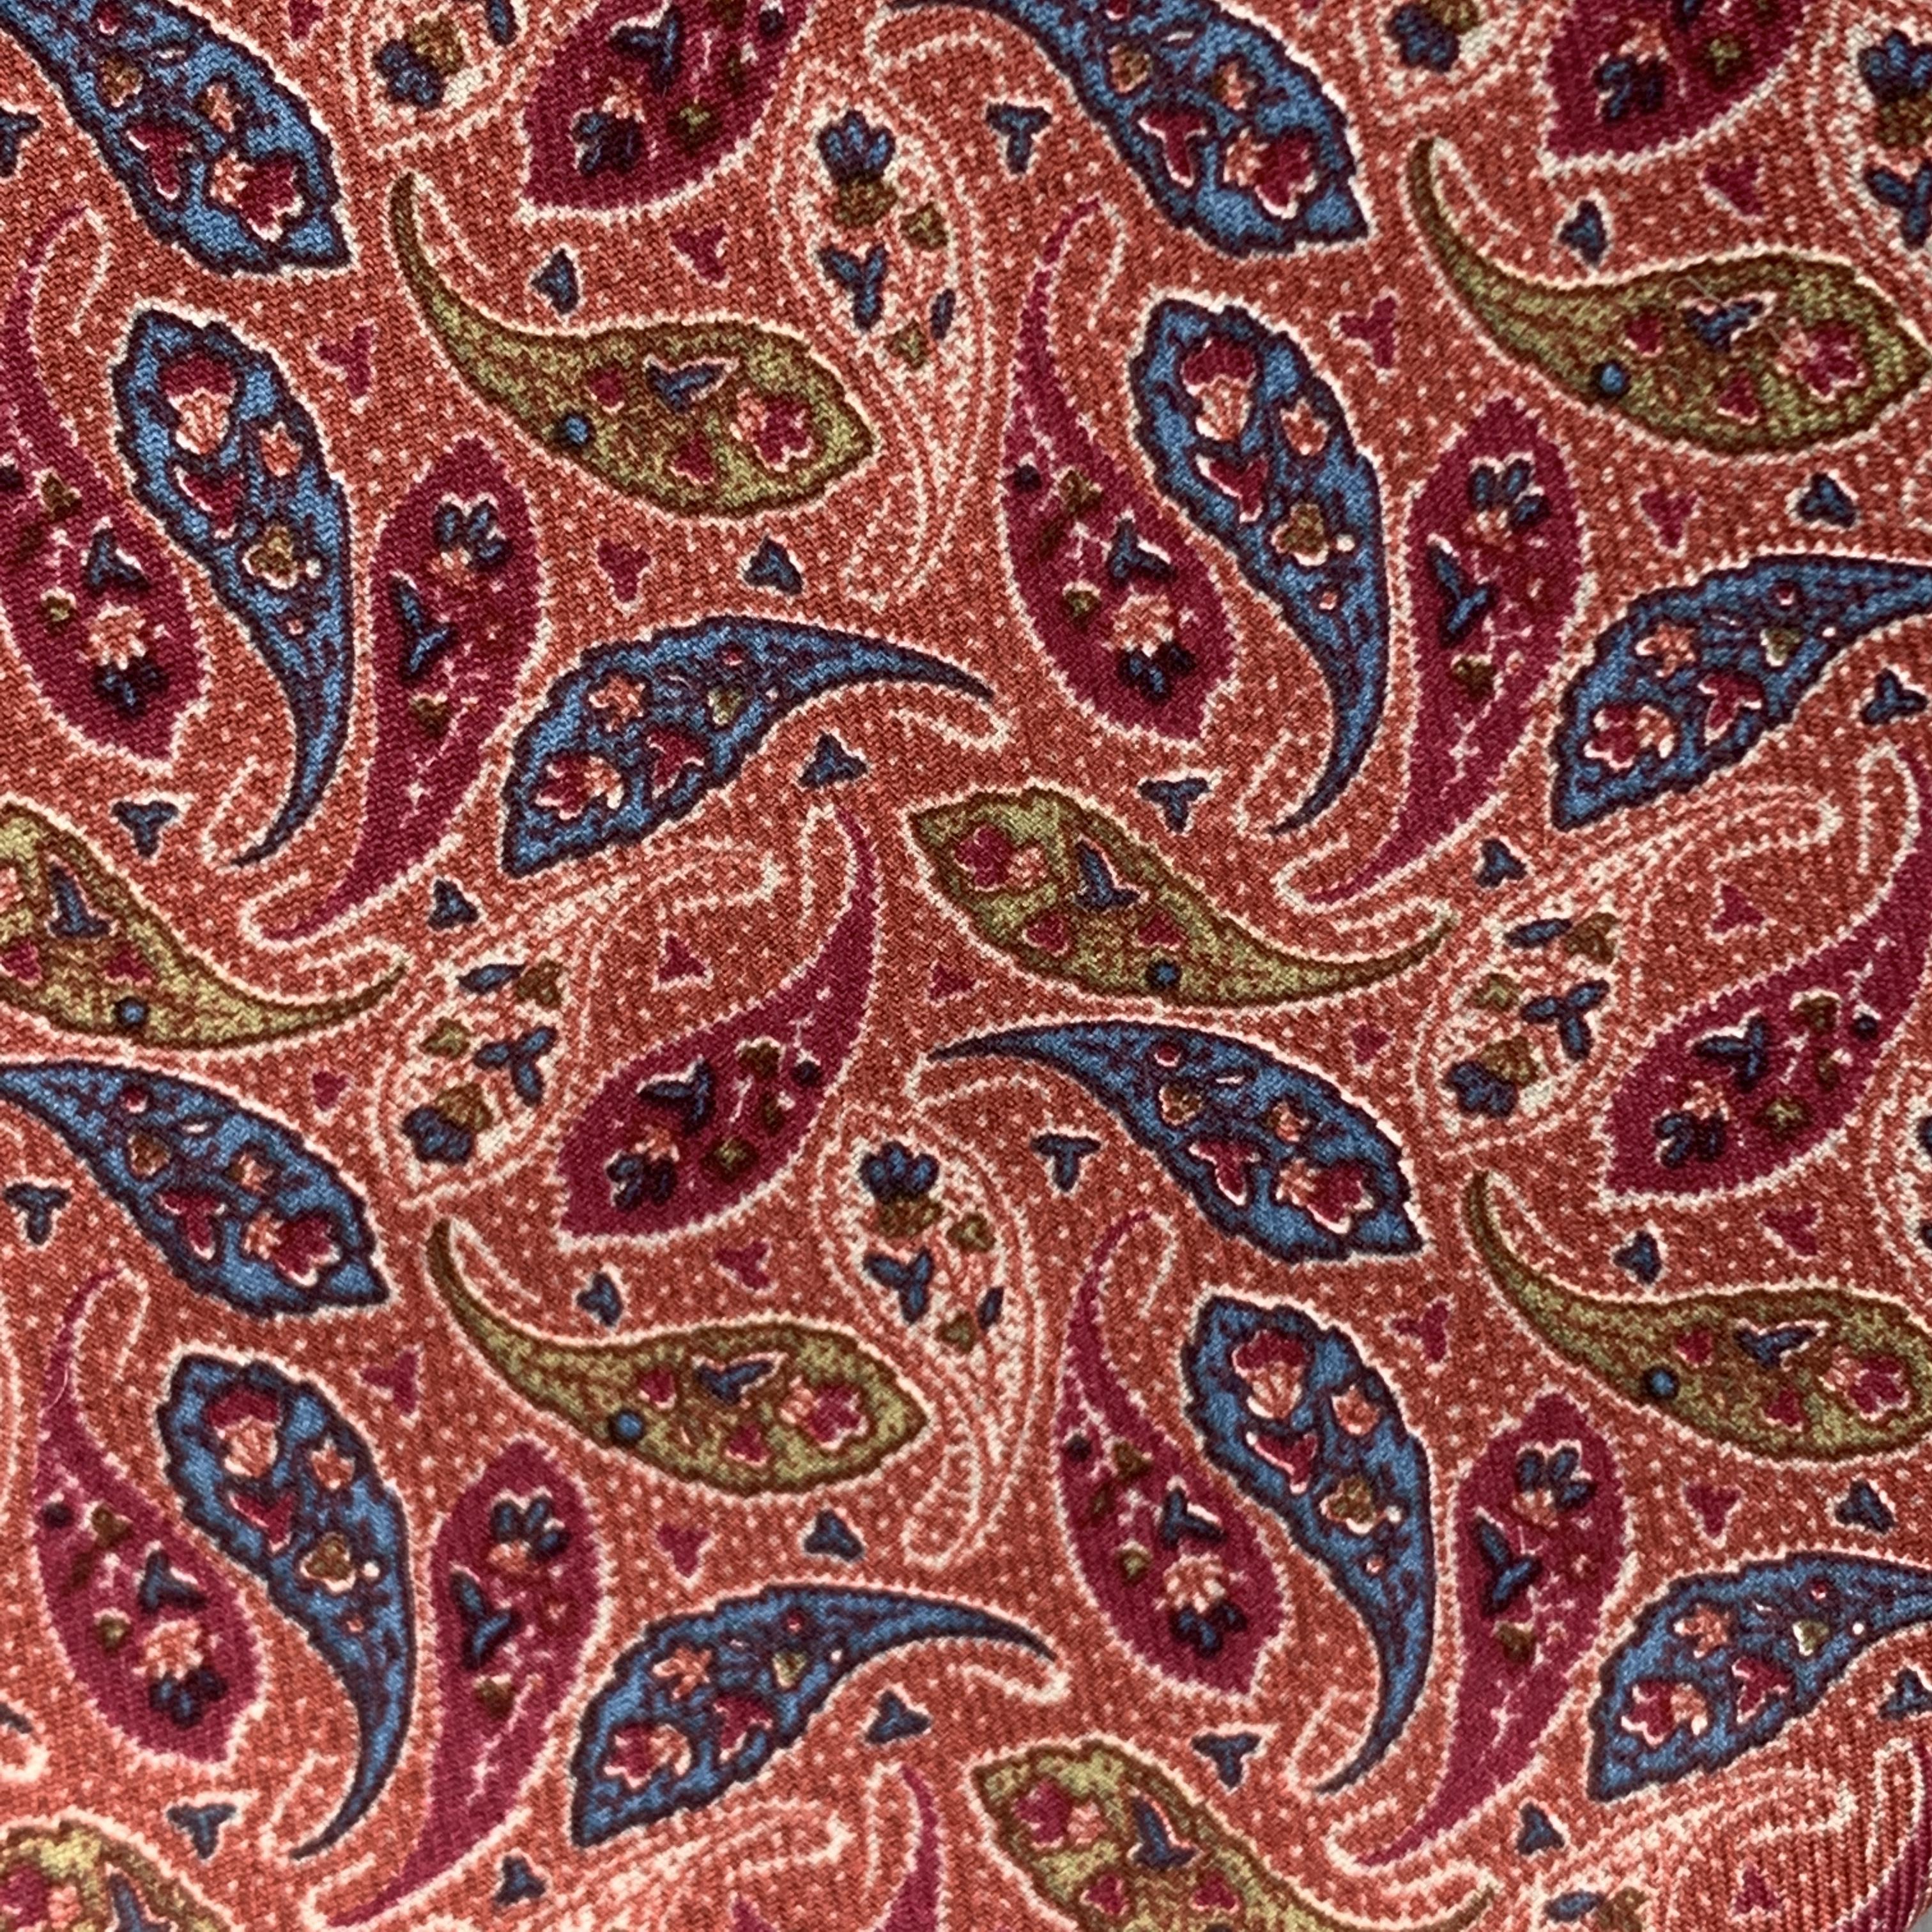 HERMES necktie comes in muted brick red silk twill with all over blue and green paisley print. Made in France.

Excellent Pre-Owned Condition.

Width: 3.25 in. 